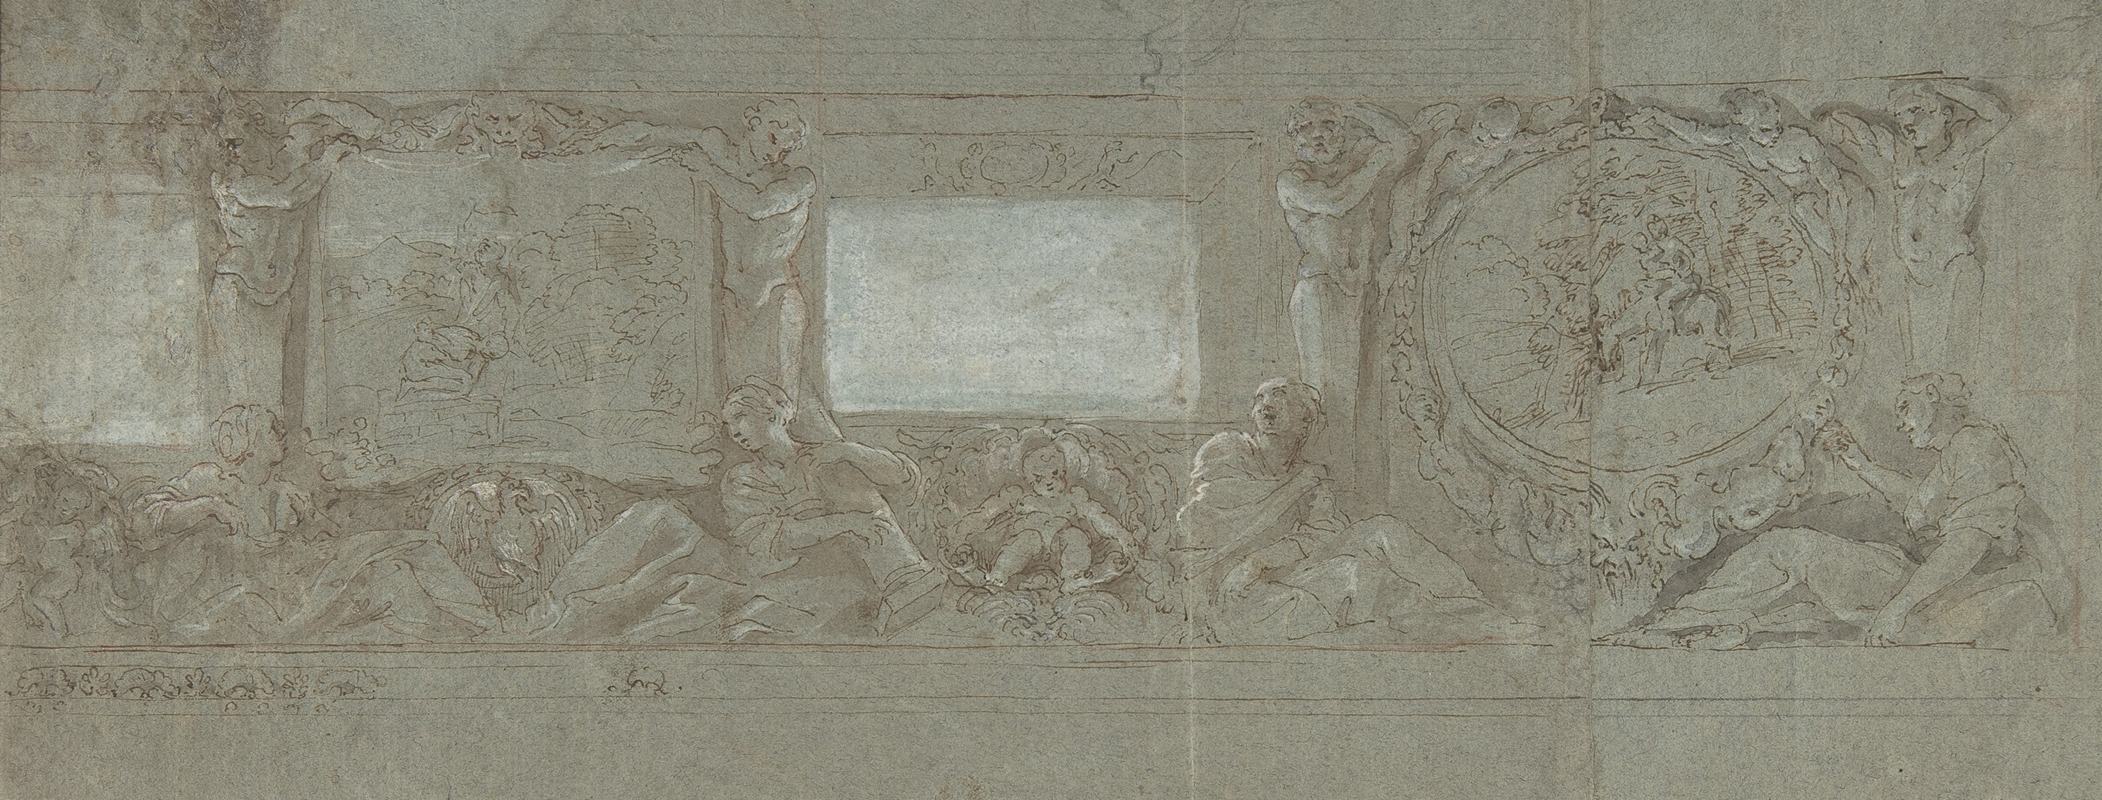 Giovanni Lanfranco - Design for a Wall Decoration with the Sacrifice of Abraham and the Flight into Egypt